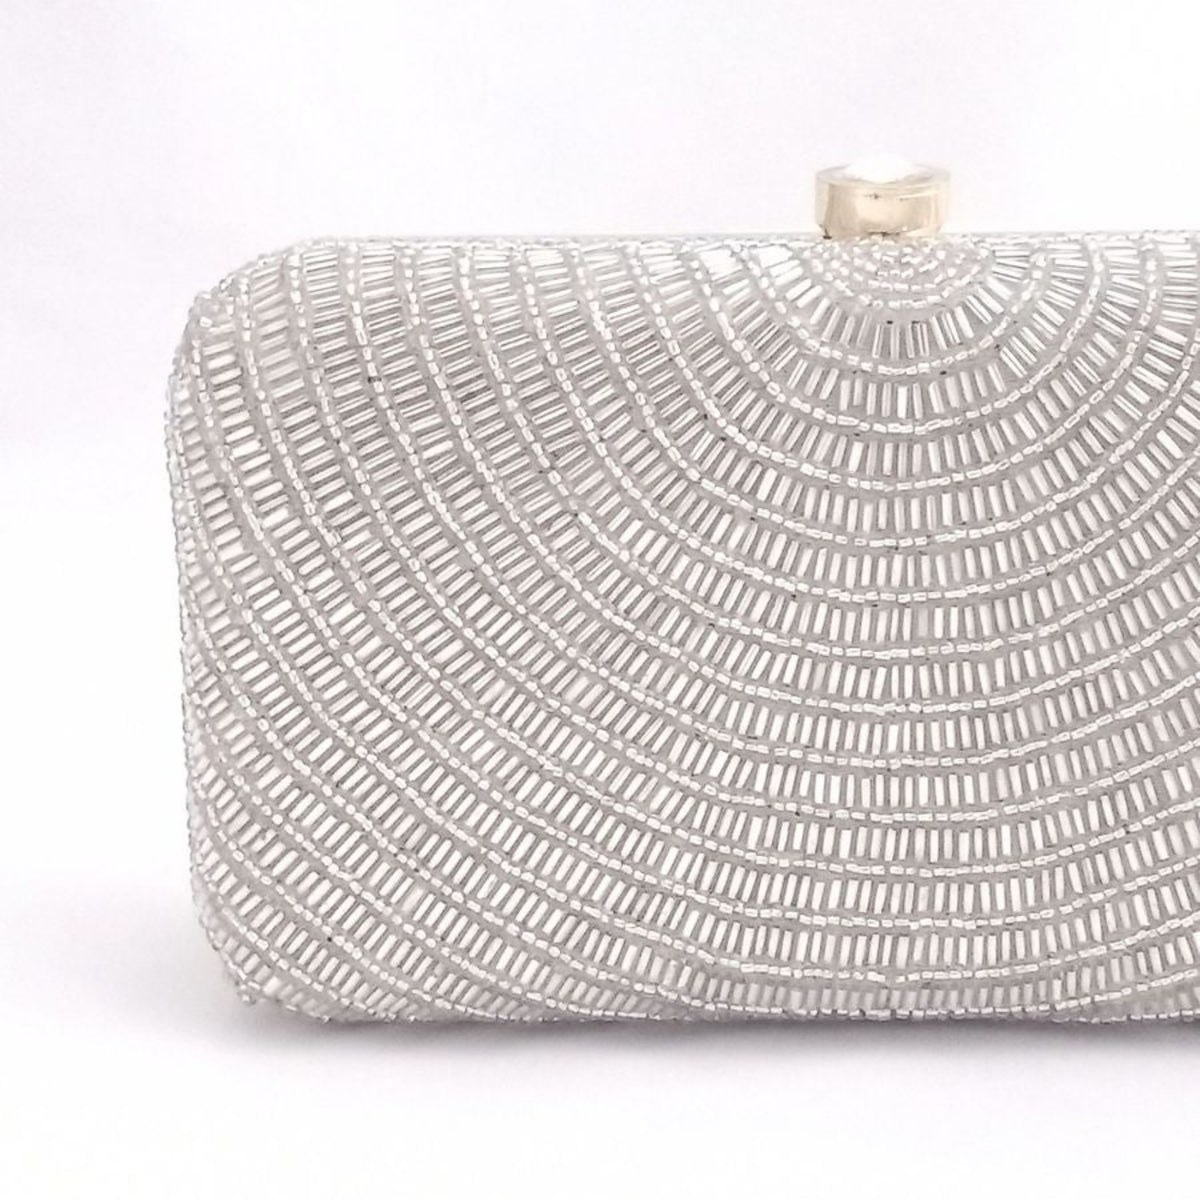 Silver cleopatra handembroidered clutch